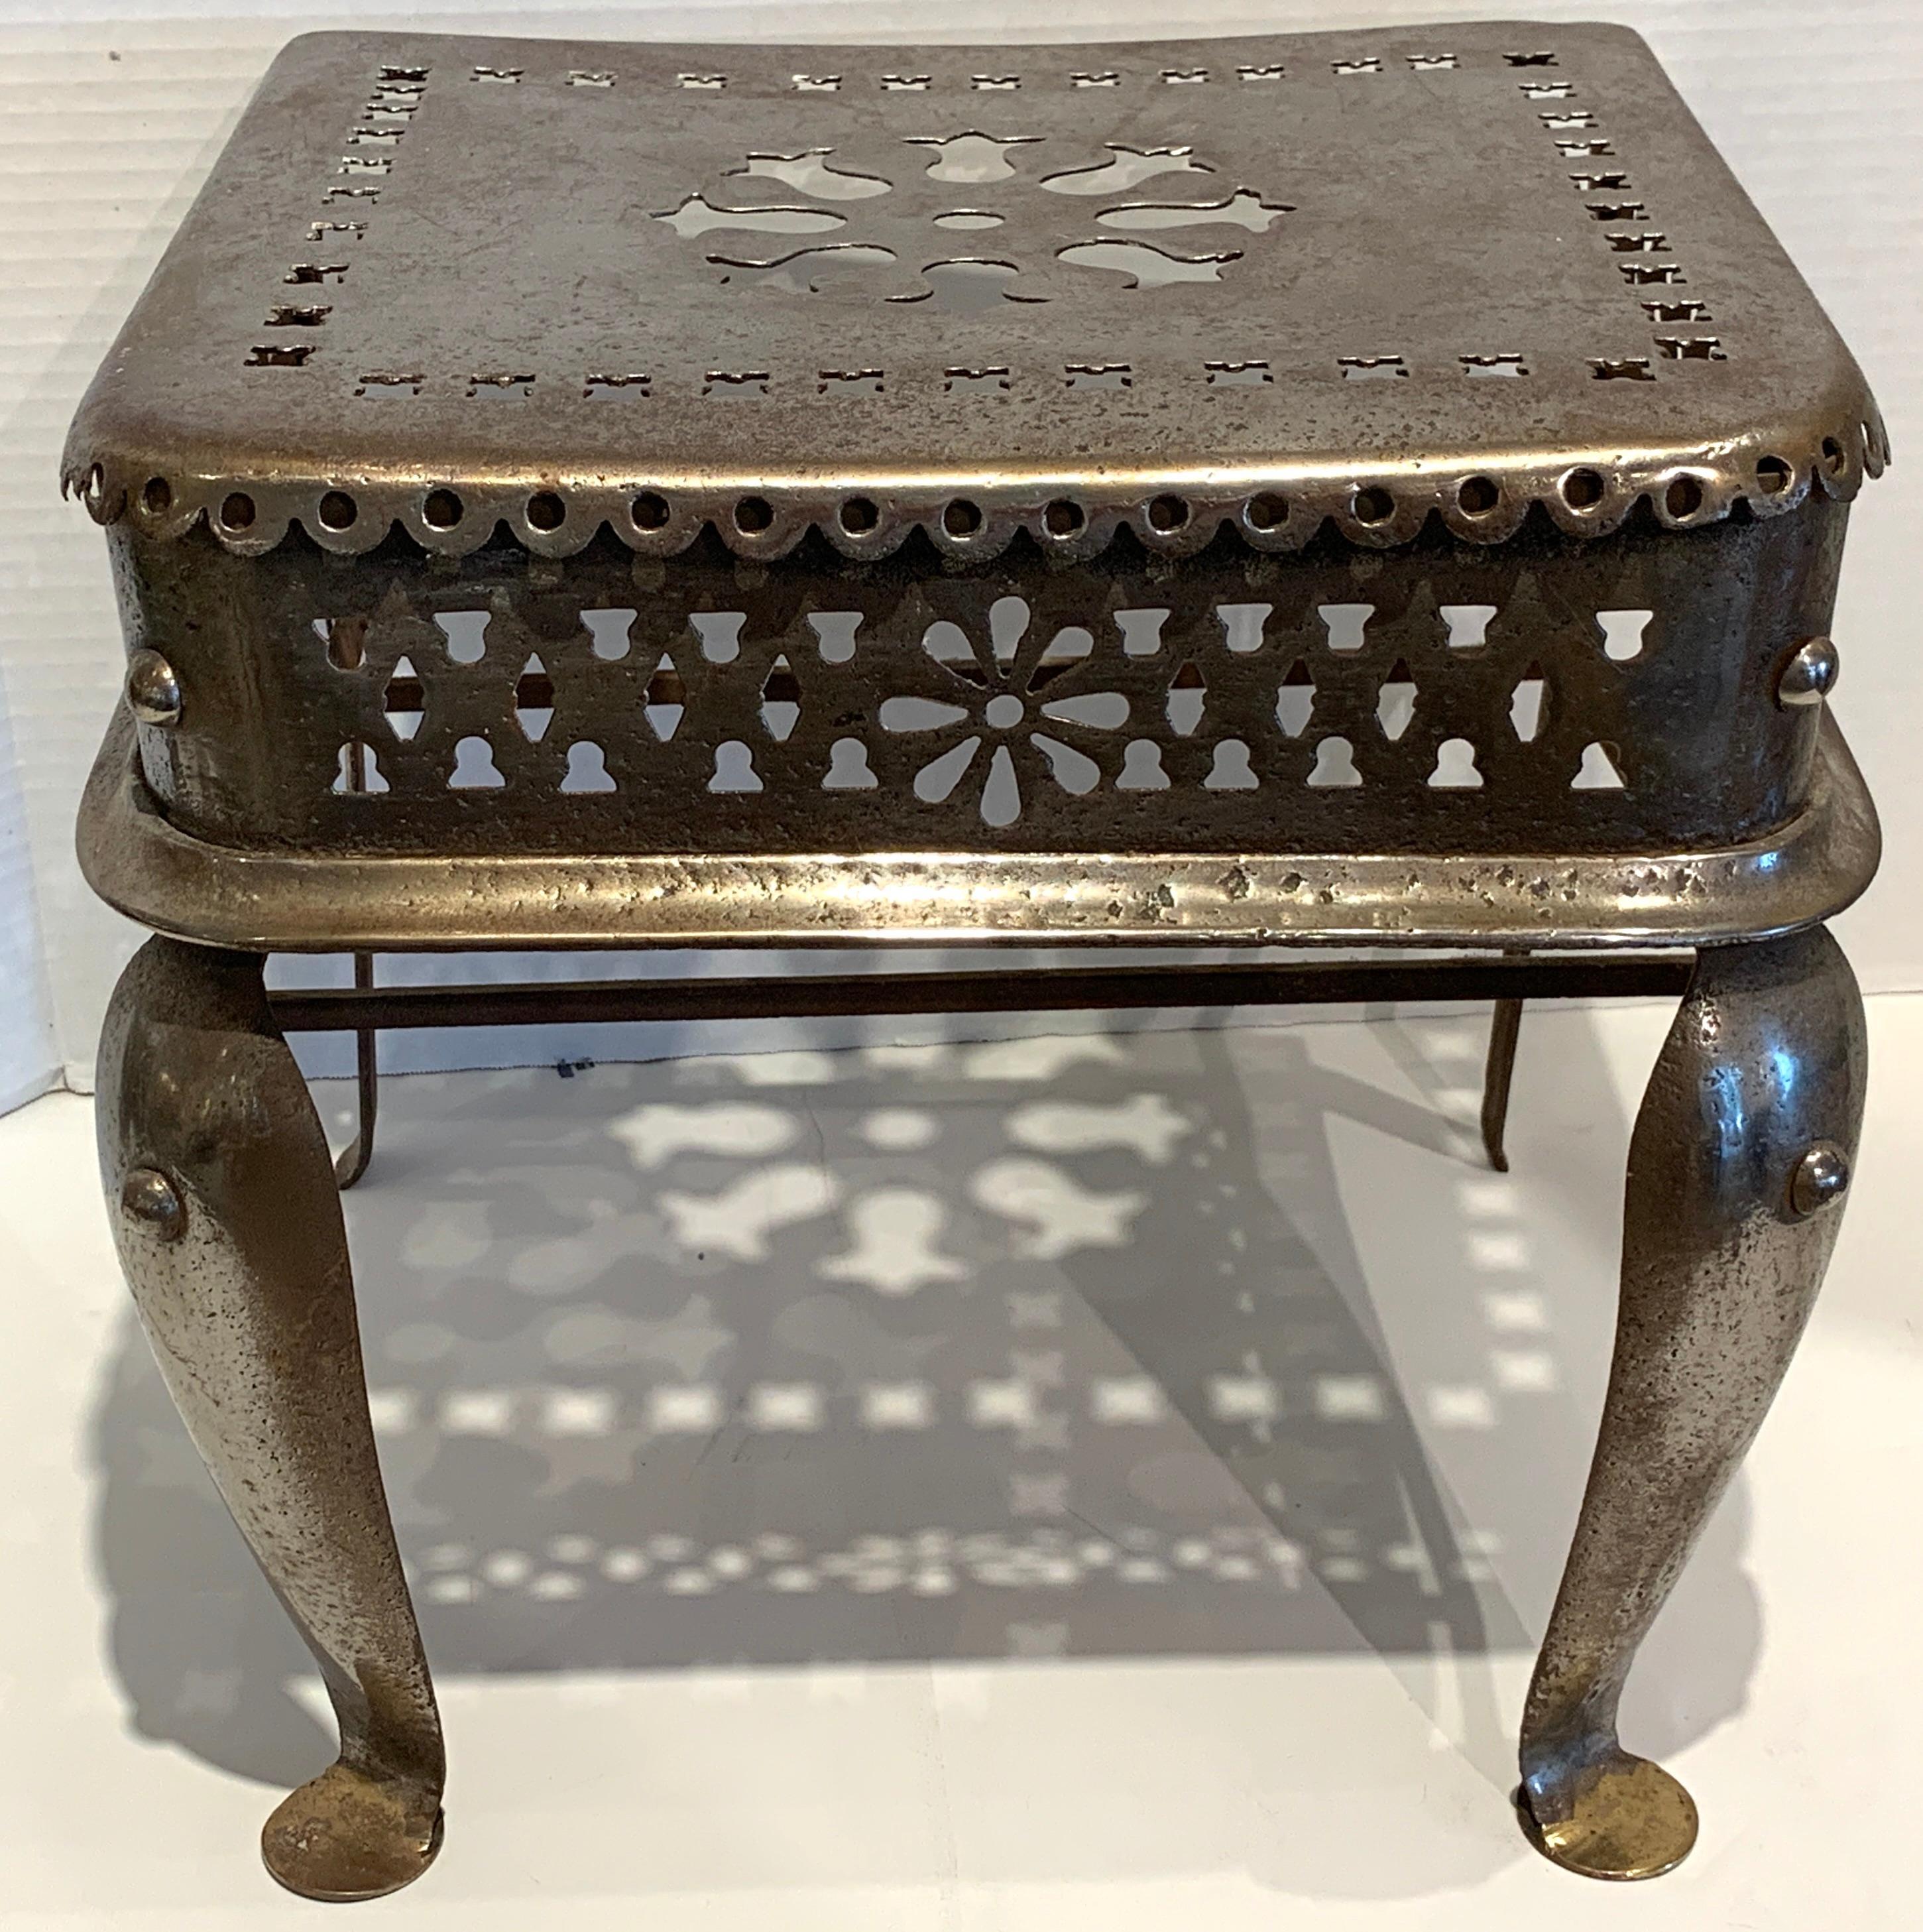 English Paktong fireplace footman / stand, with all-over pierced decoration, raised on four pad footed legs. Used for fireplace fire stool English hearth stand, fireside trivet, or even a coach step.